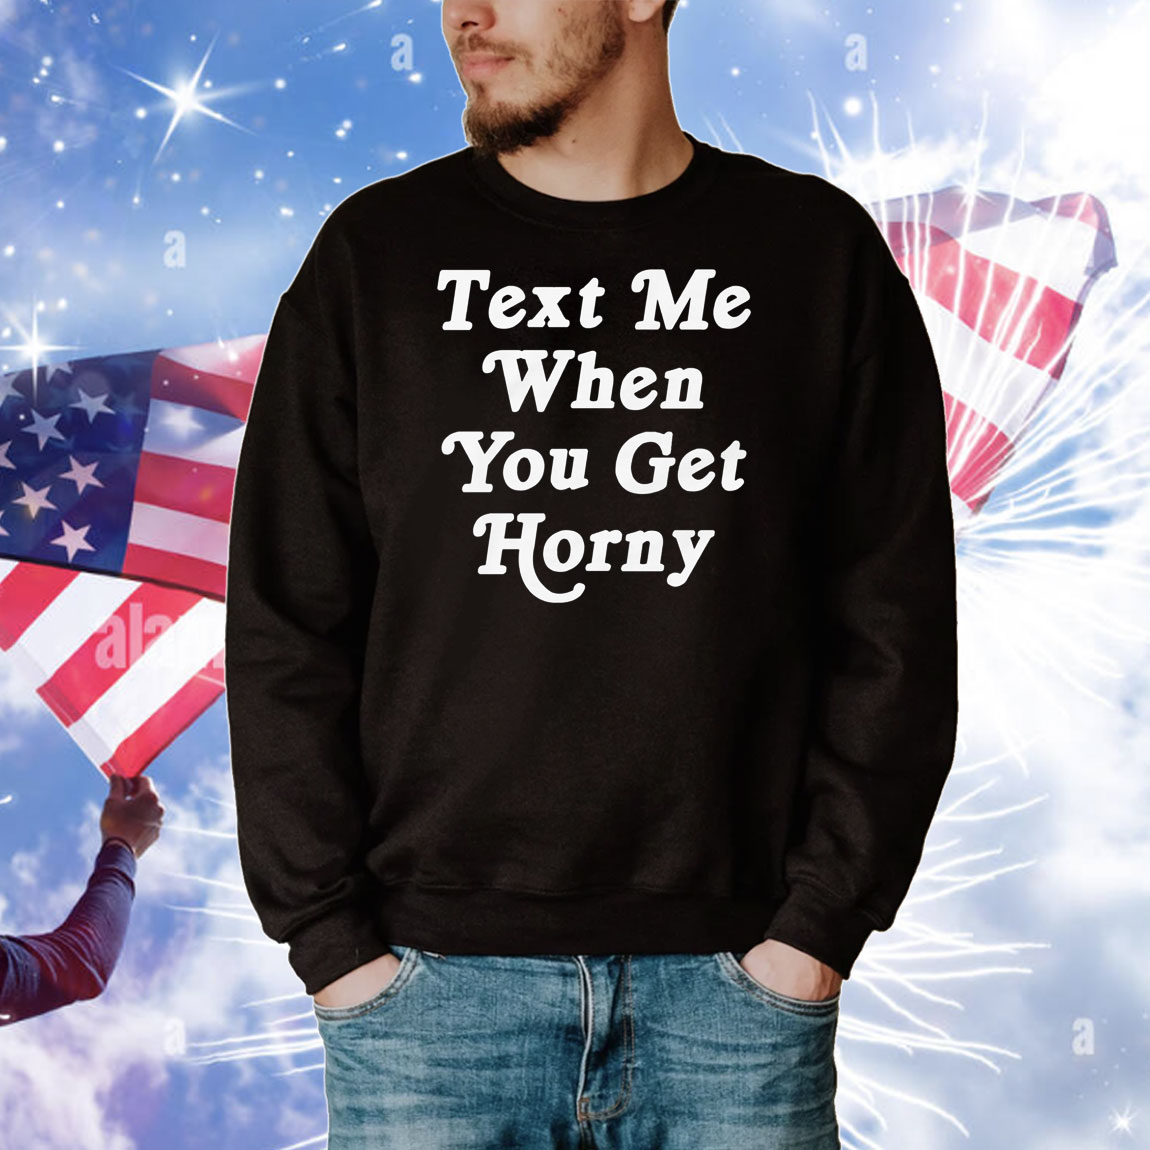 Text Me When You Get Horny Tee Shirts